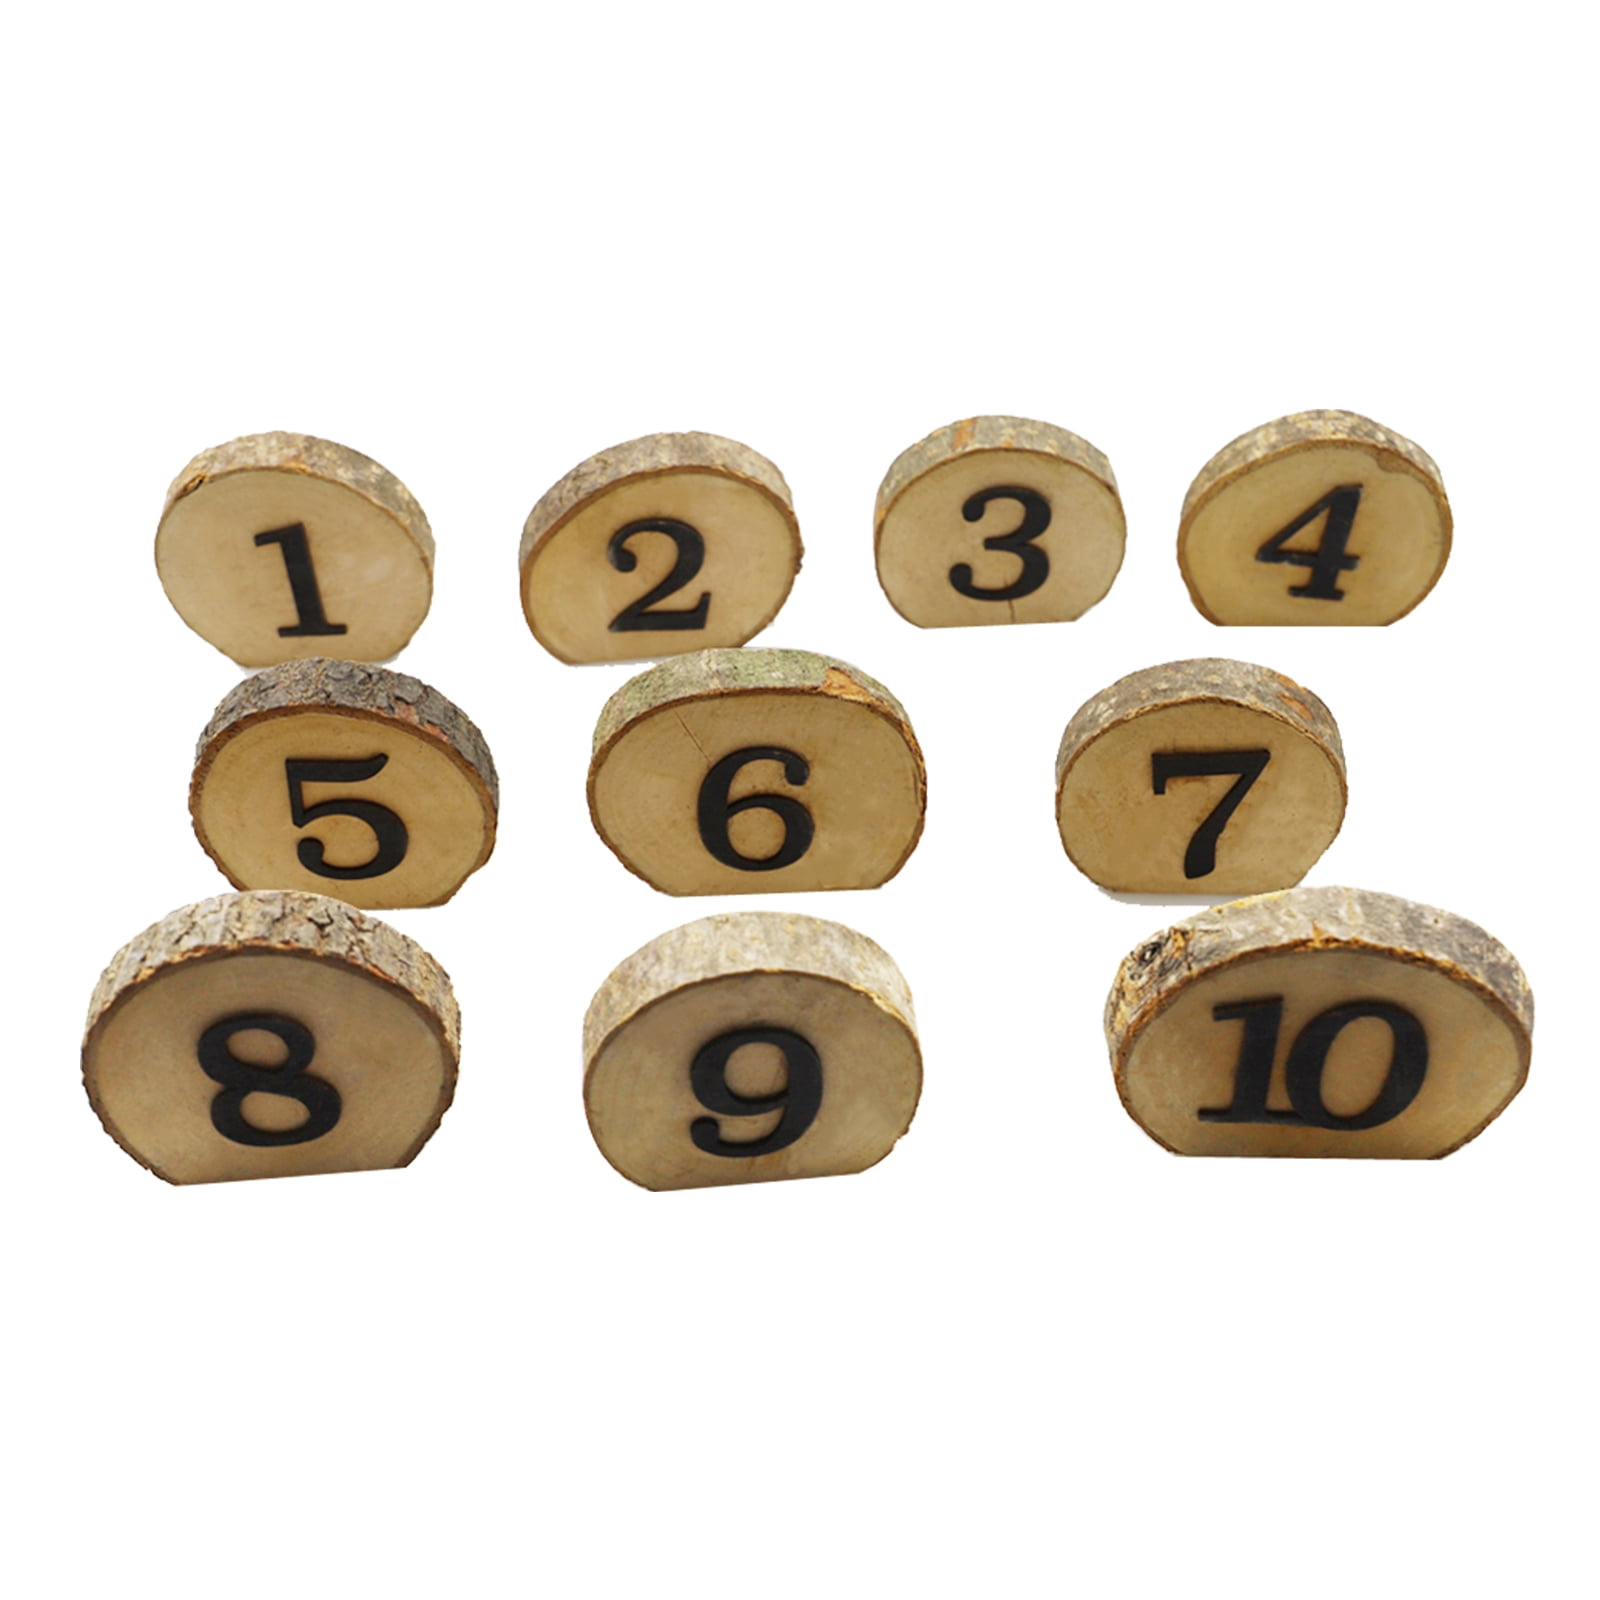 1-10 Long Strip Wooden Table Numbers for Wedding Birthday Party Table Centerpieces Décor Digital of Seat Number 1-10 10Pcs 